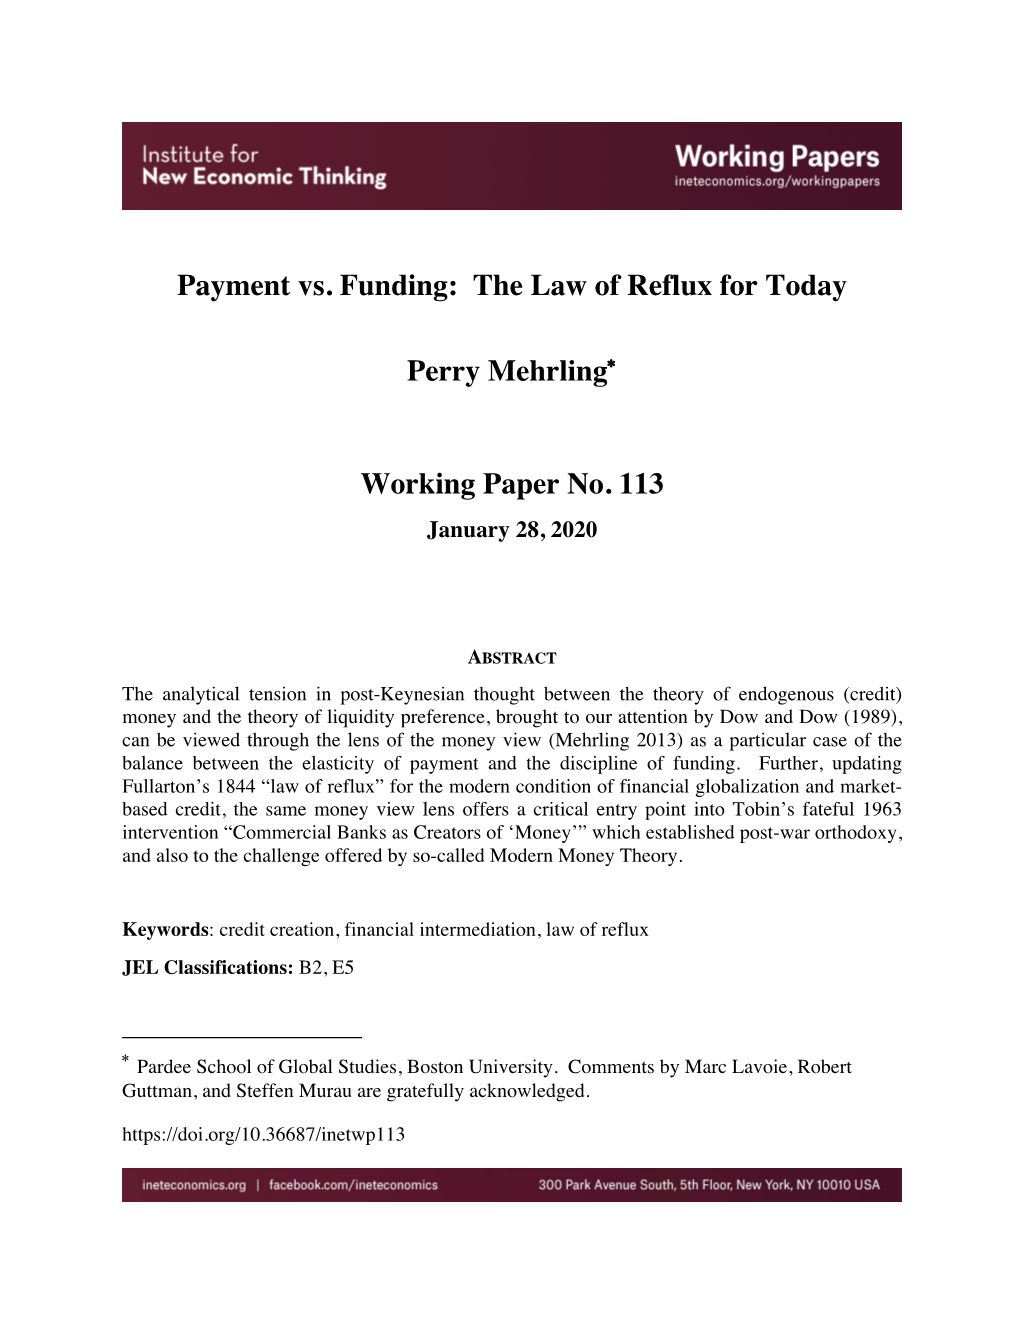 Payment Vs. Funding: the Law of Reflux for Today Perry Mehrling Working Paper No